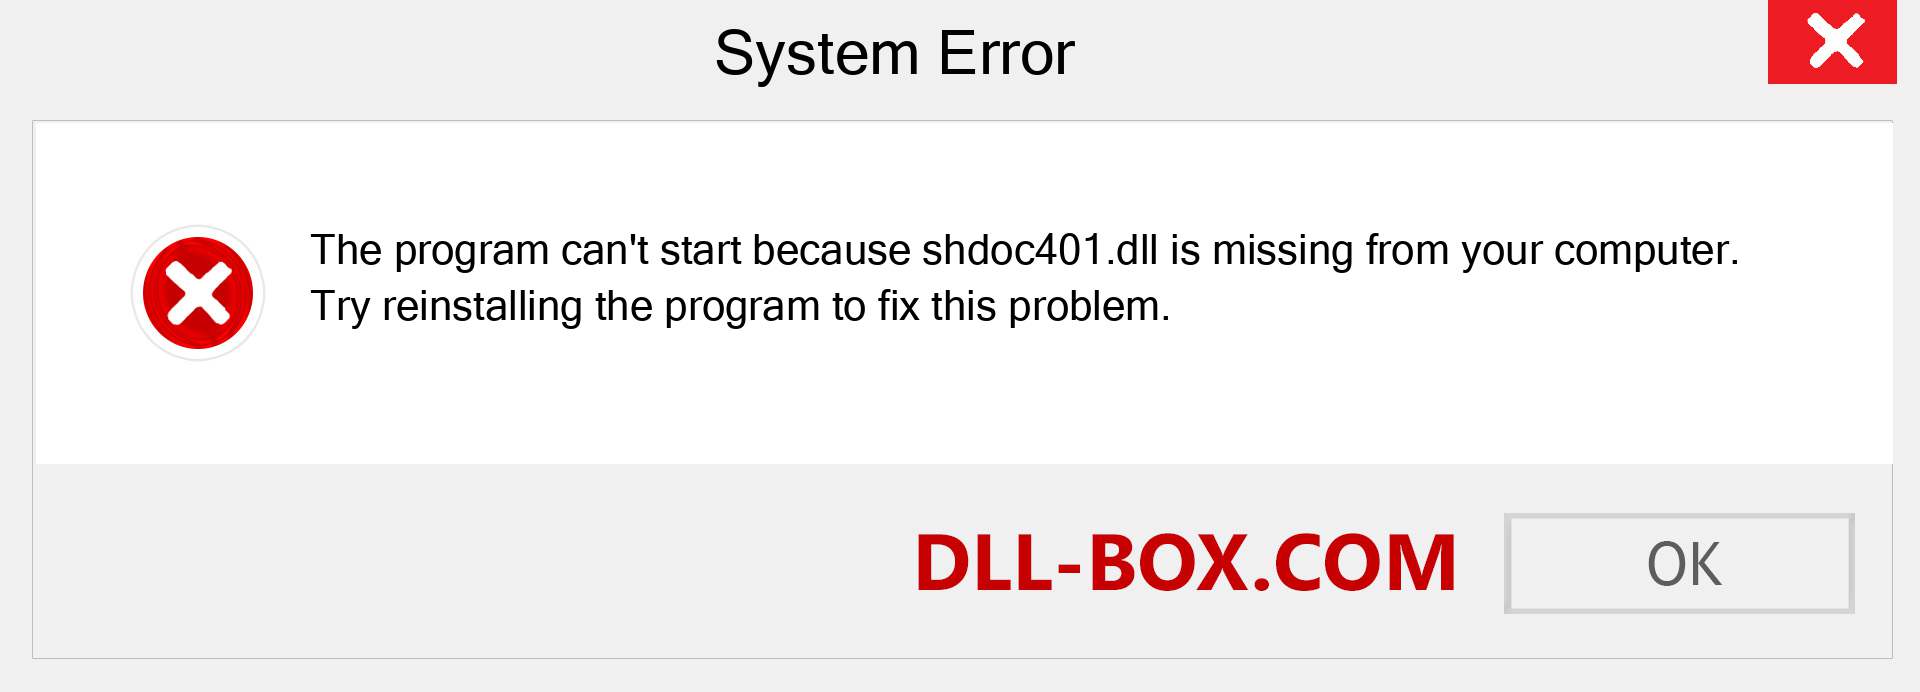  shdoc401.dll file is missing?. Download for Windows 7, 8, 10 - Fix  shdoc401 dll Missing Error on Windows, photos, images